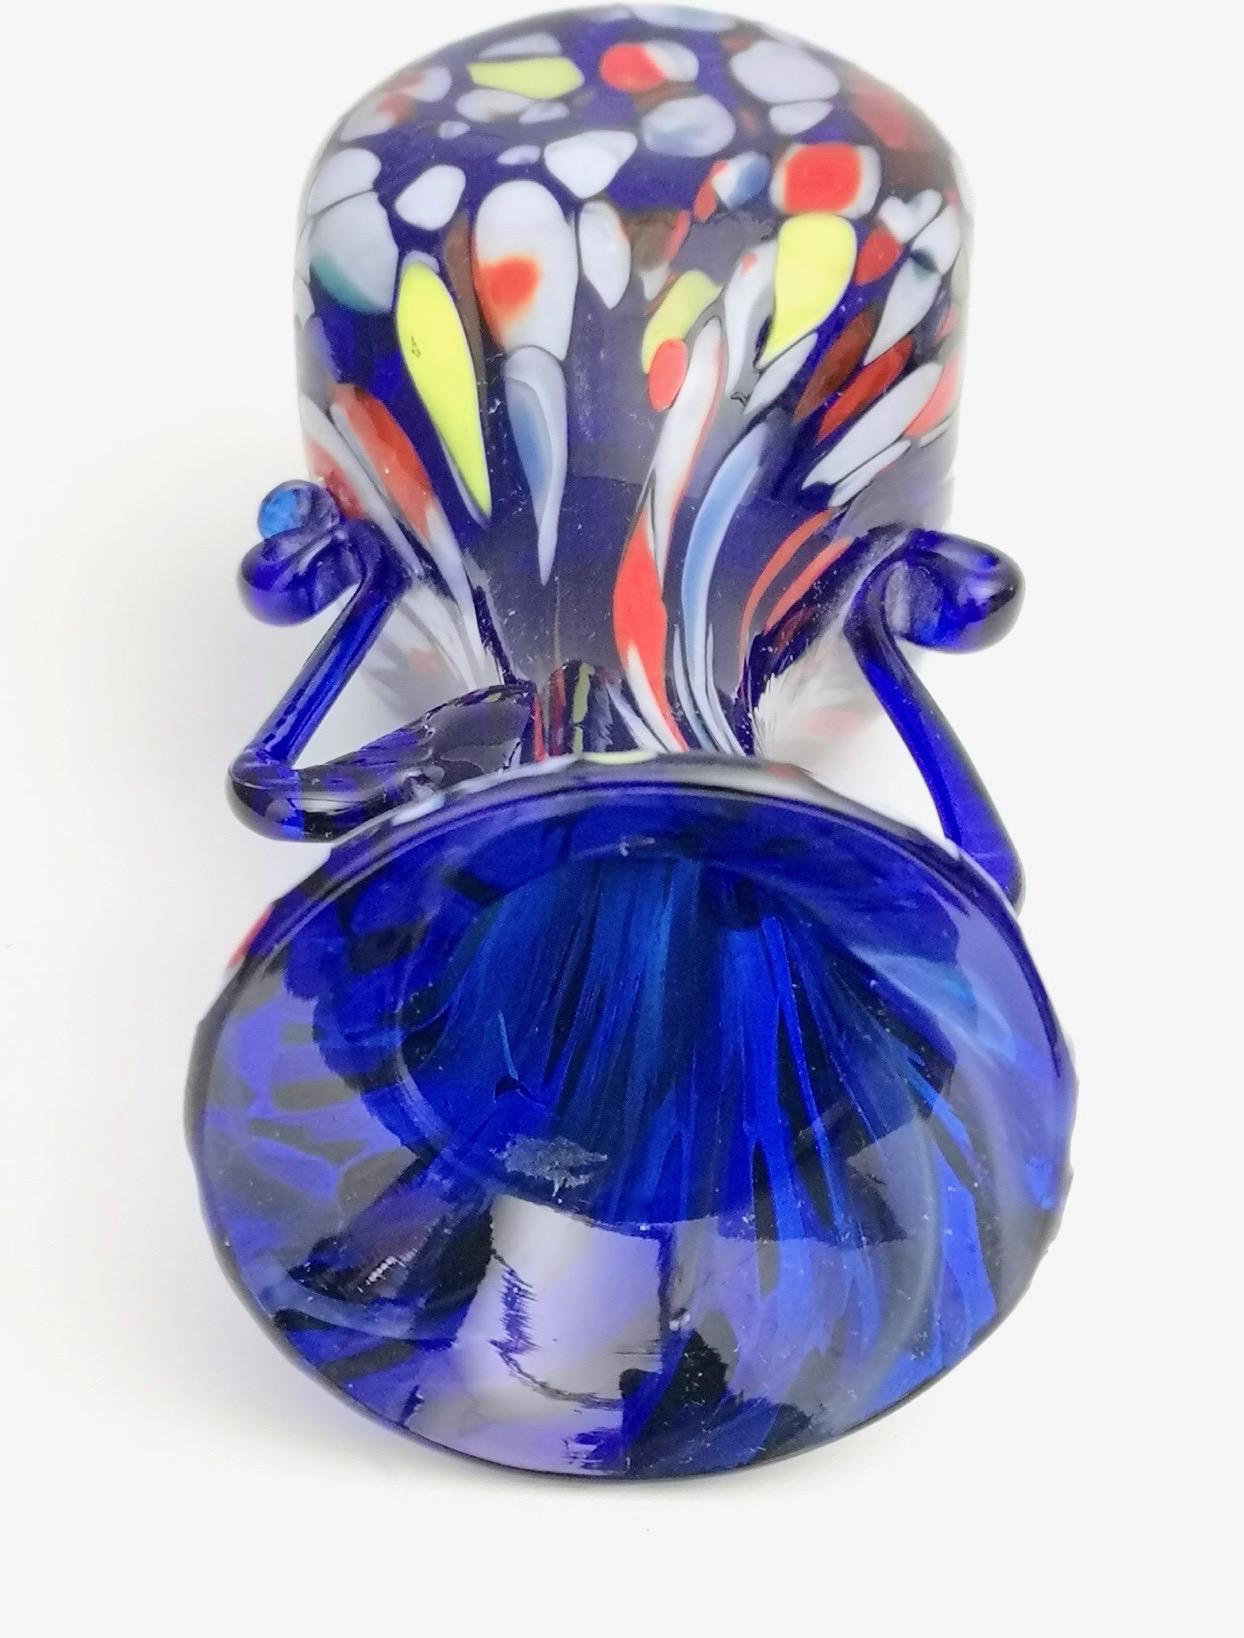 Vintage Art Nouveau Blue Murano Glass Vase Produced by Toso, Italy For Sale 1